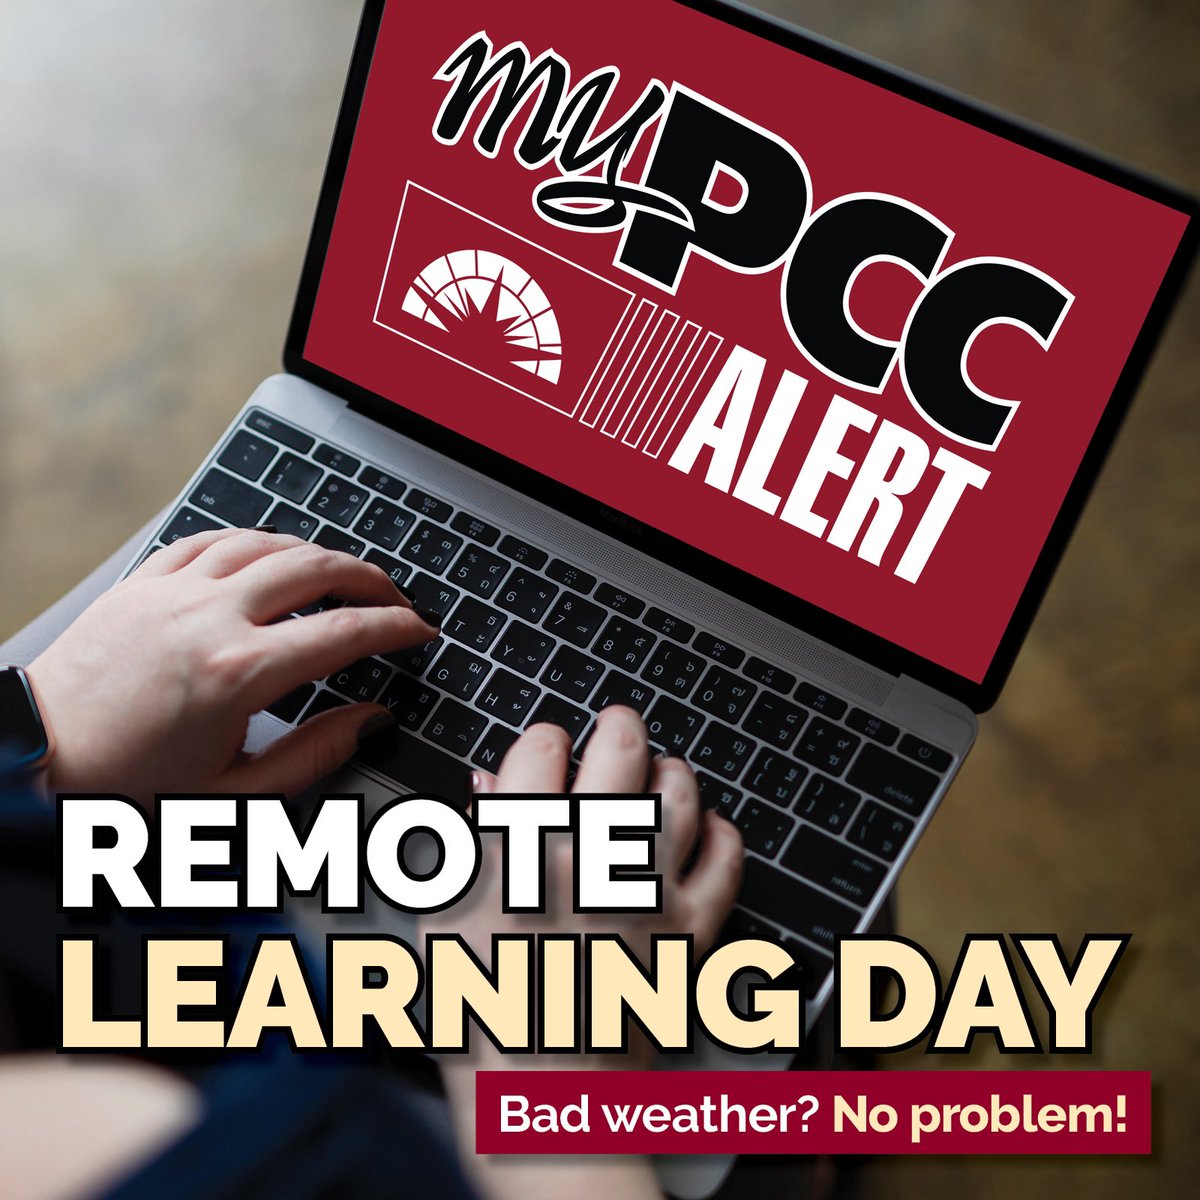 PCC SOUTHWEST: Due to weather, all Southwest campuses & sites will be on remote status Friday, Feb. 9. Students, check MyCourses for specific class instructions. All nonessential employees will work remotely. Info: pueblocc.edu/weather #MyPCCAlert